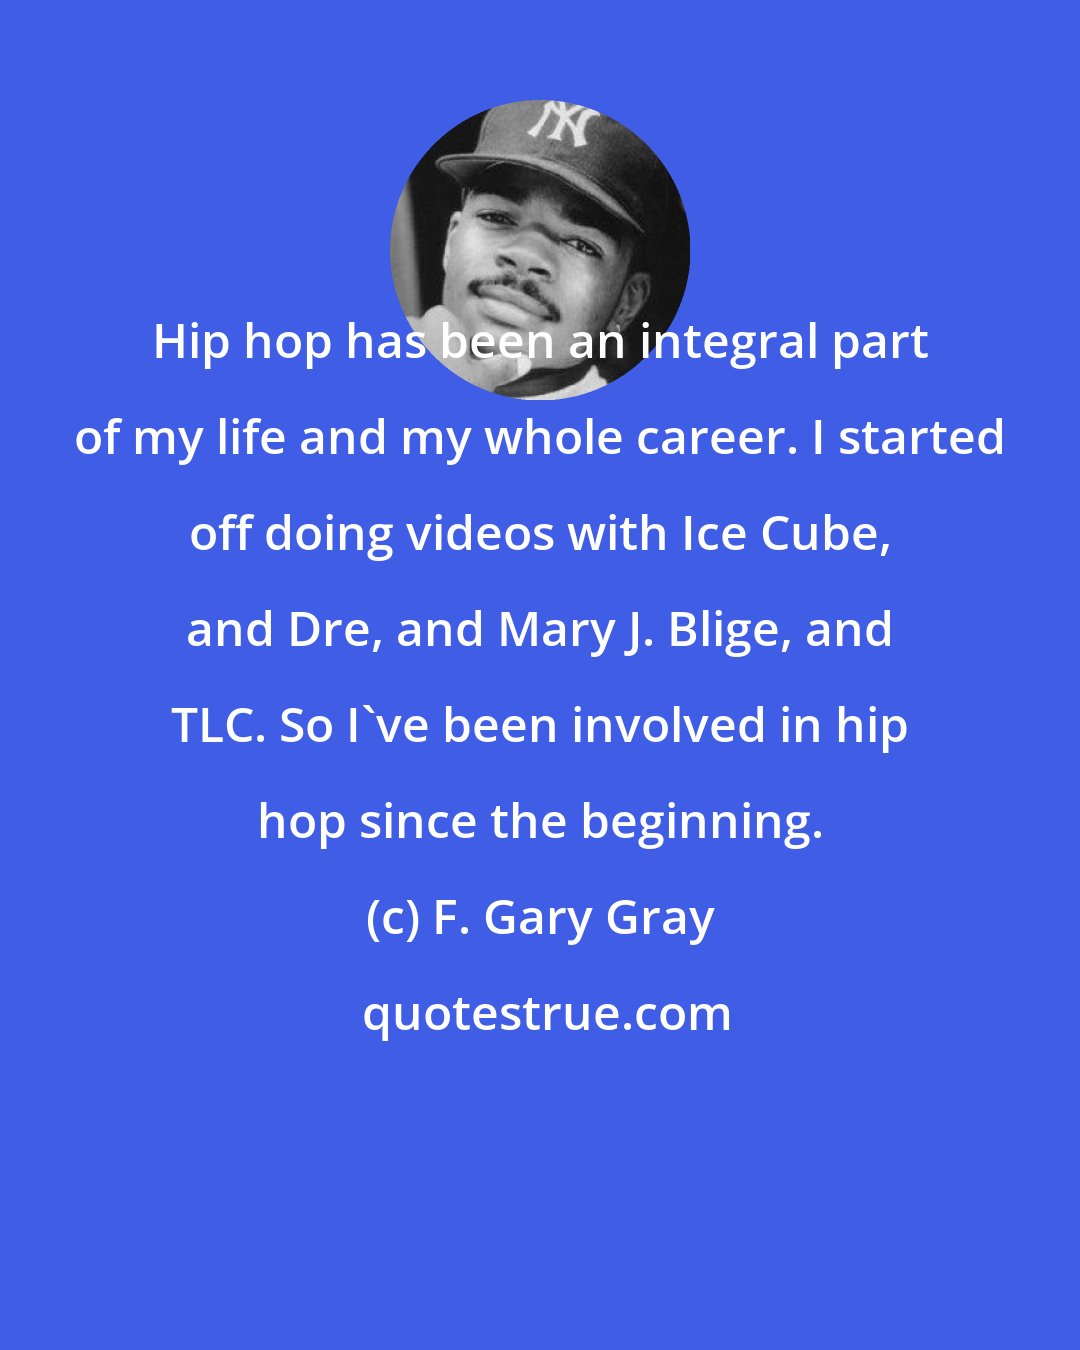 F. Gary Gray: Hip hop has been an integral part of my life and my whole career. I started off doing videos with Ice Cube, and Dre, and Mary J. Blige, and TLC. So I've been involved in hip hop since the beginning.